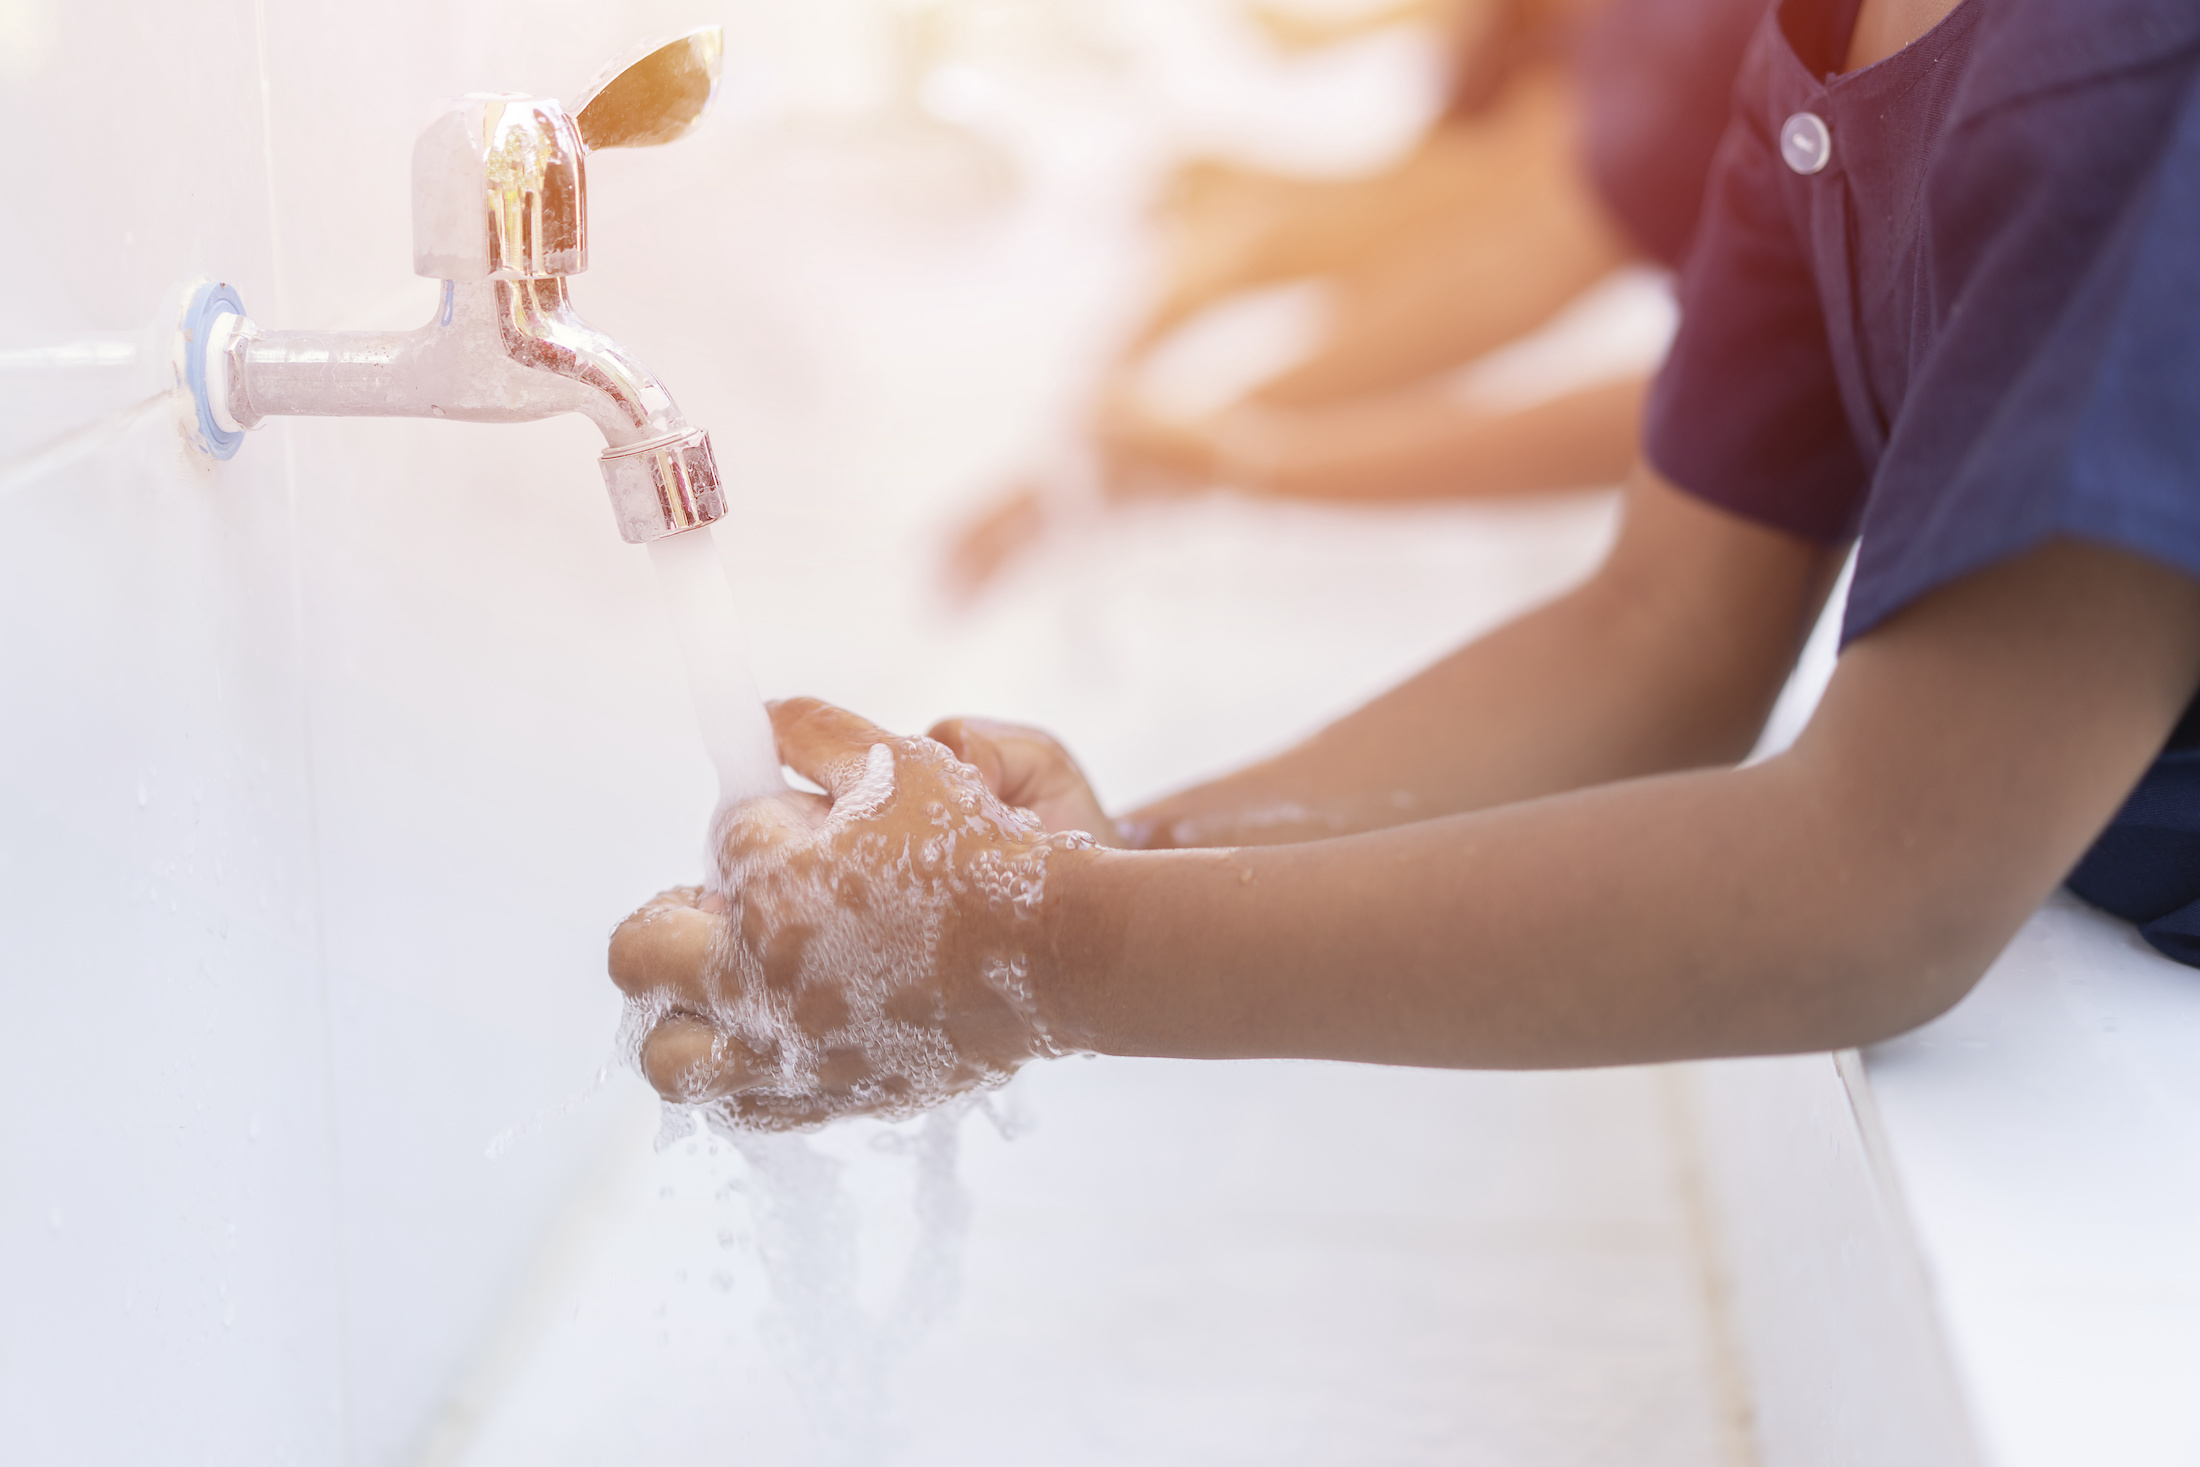 Children washing hands with soap under the faucet with water